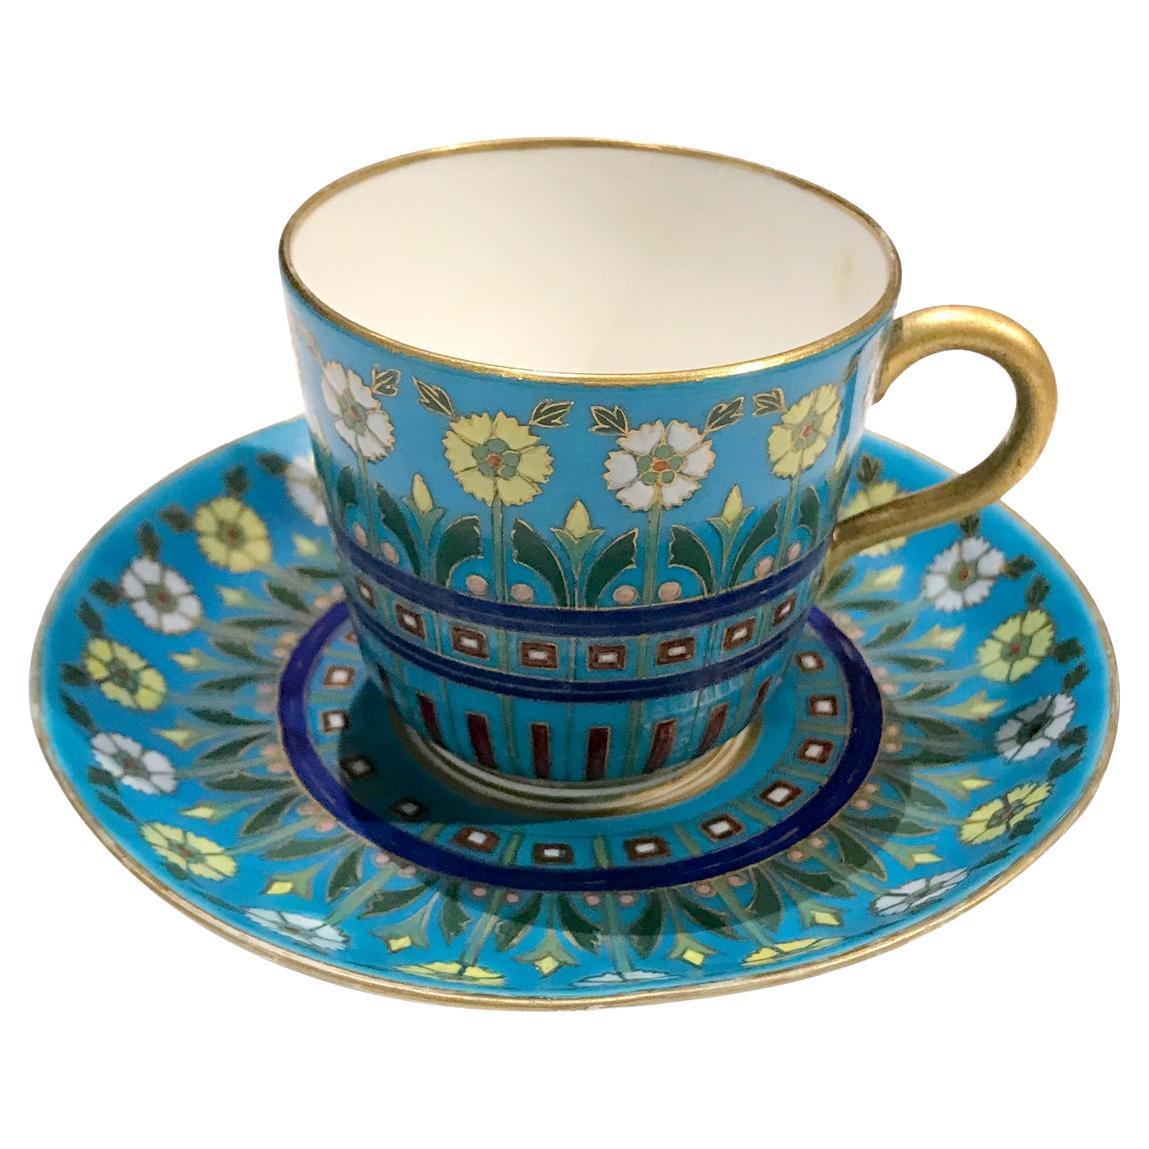 Minton Cloisonné Style Coffee Cup Attributed to Christopher Dresser